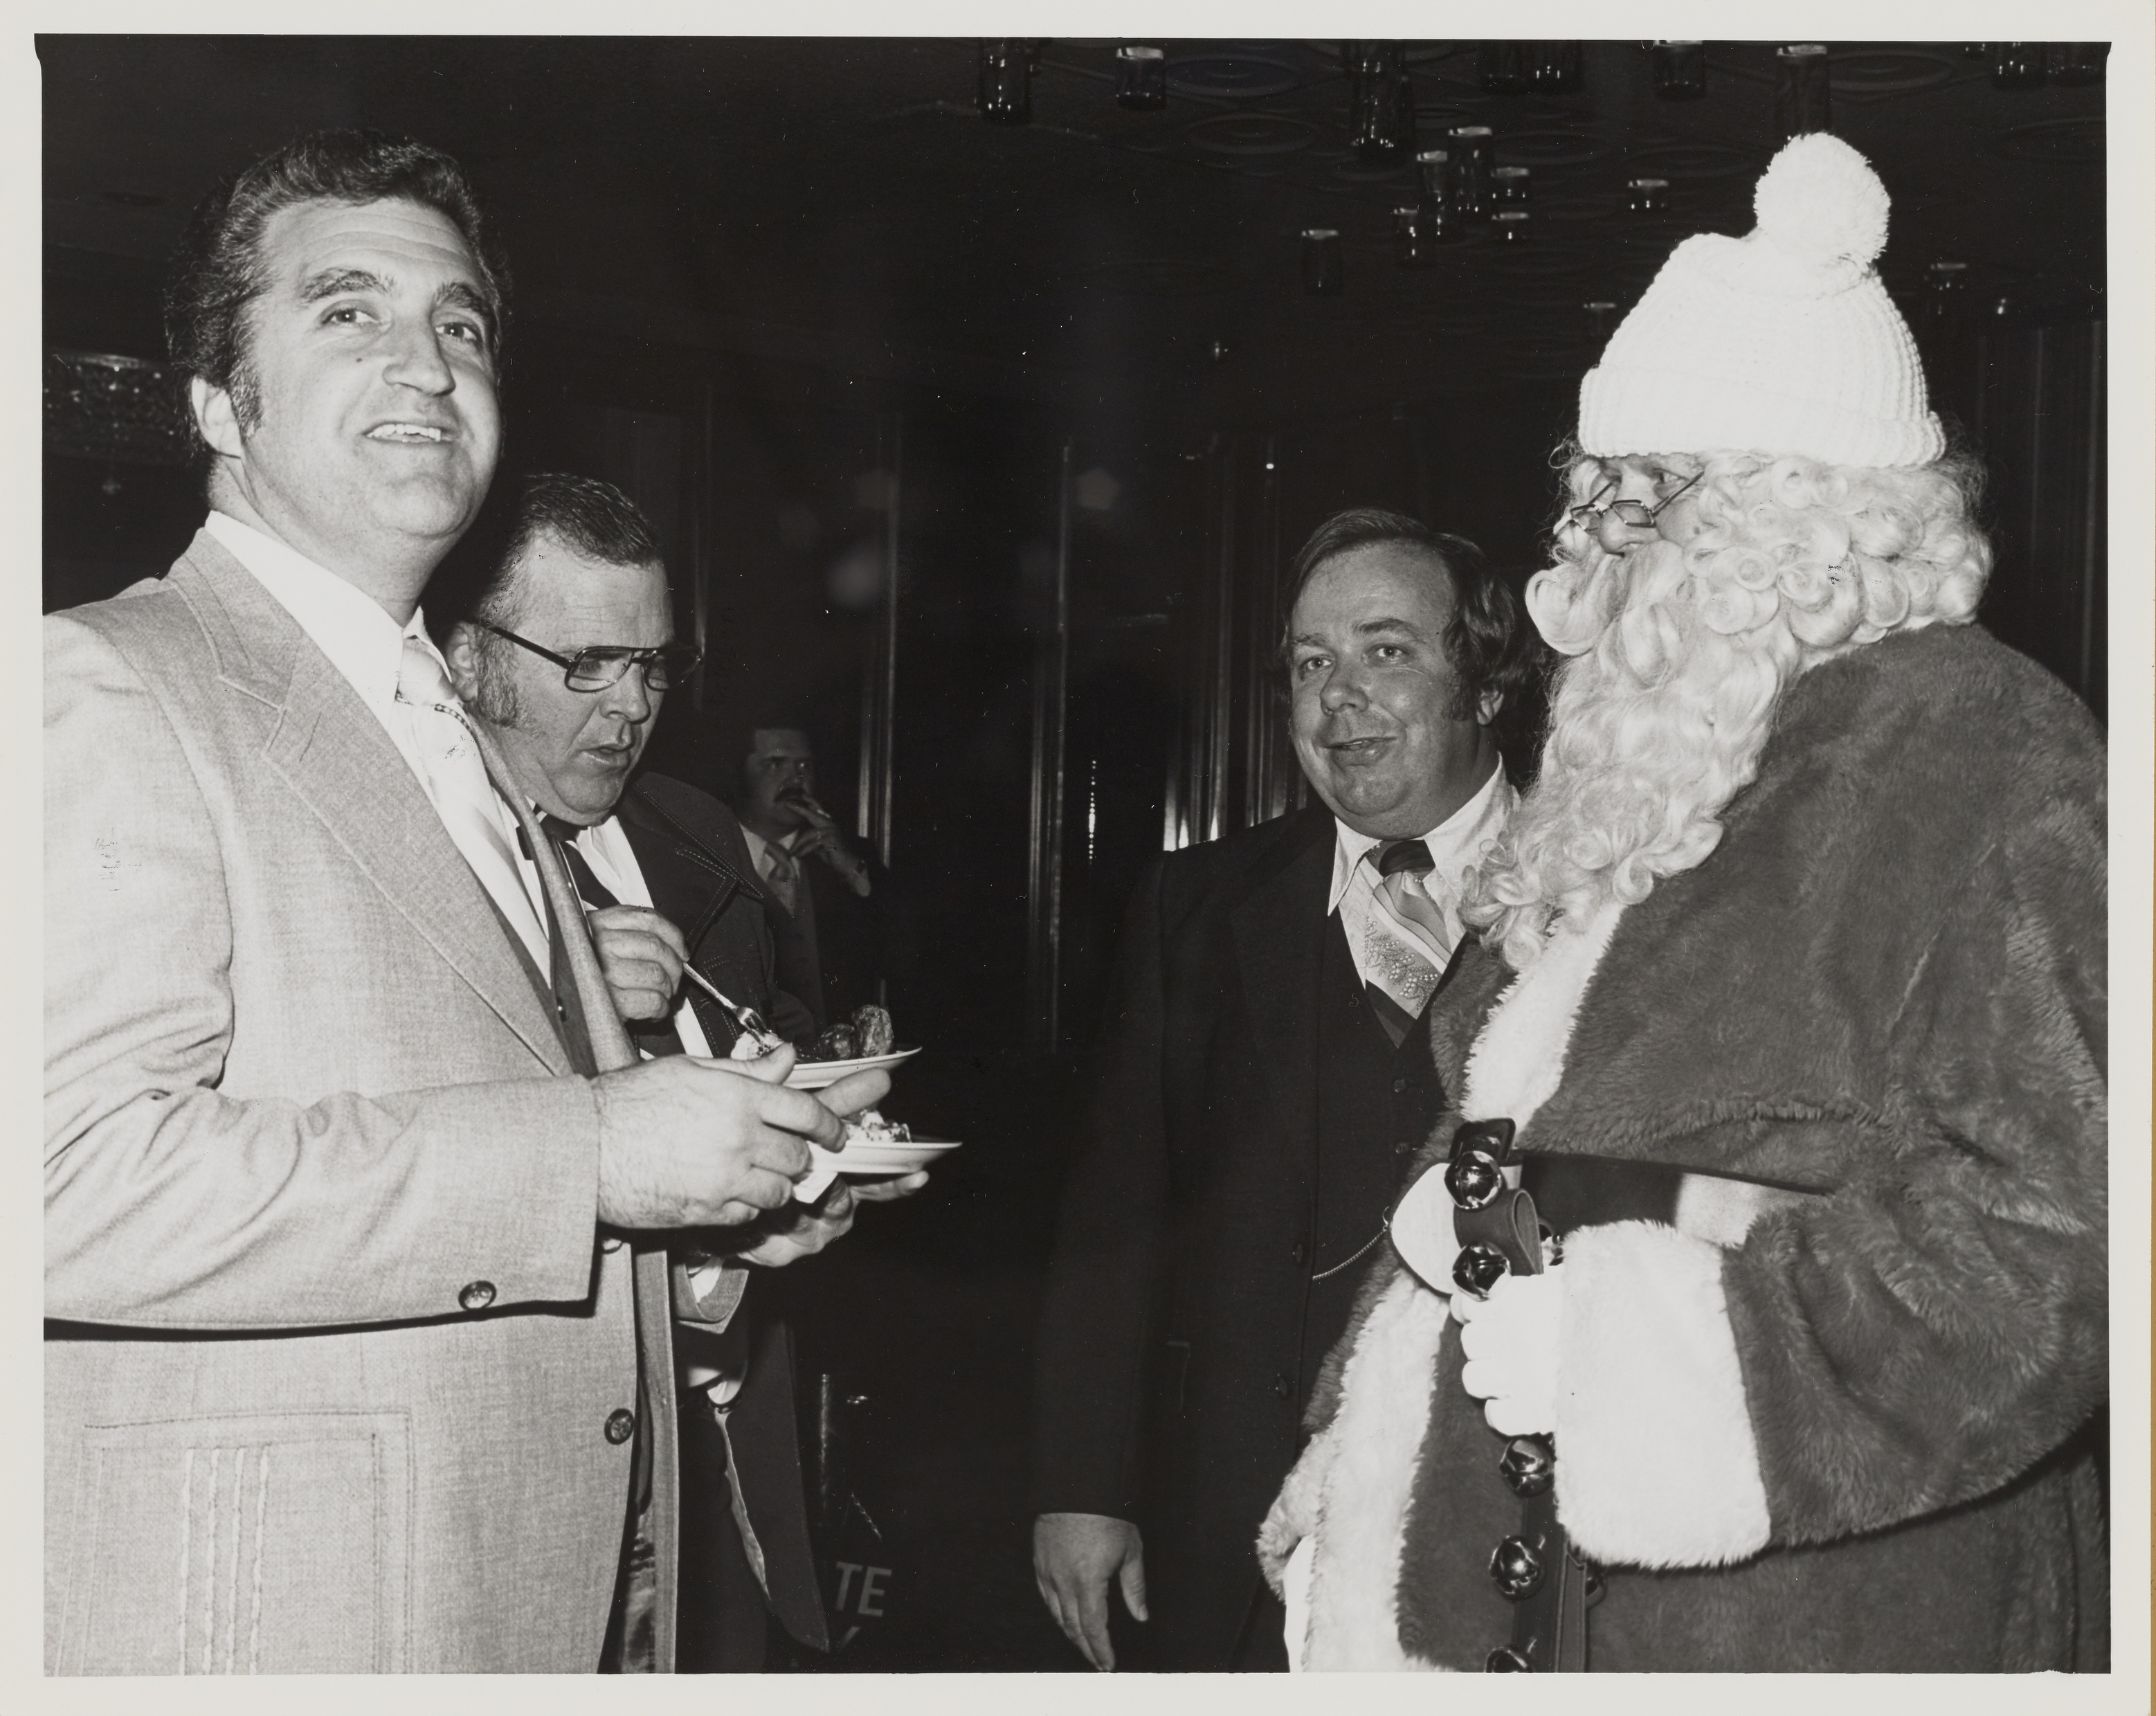 Photograph of Ron Lurie with Santa